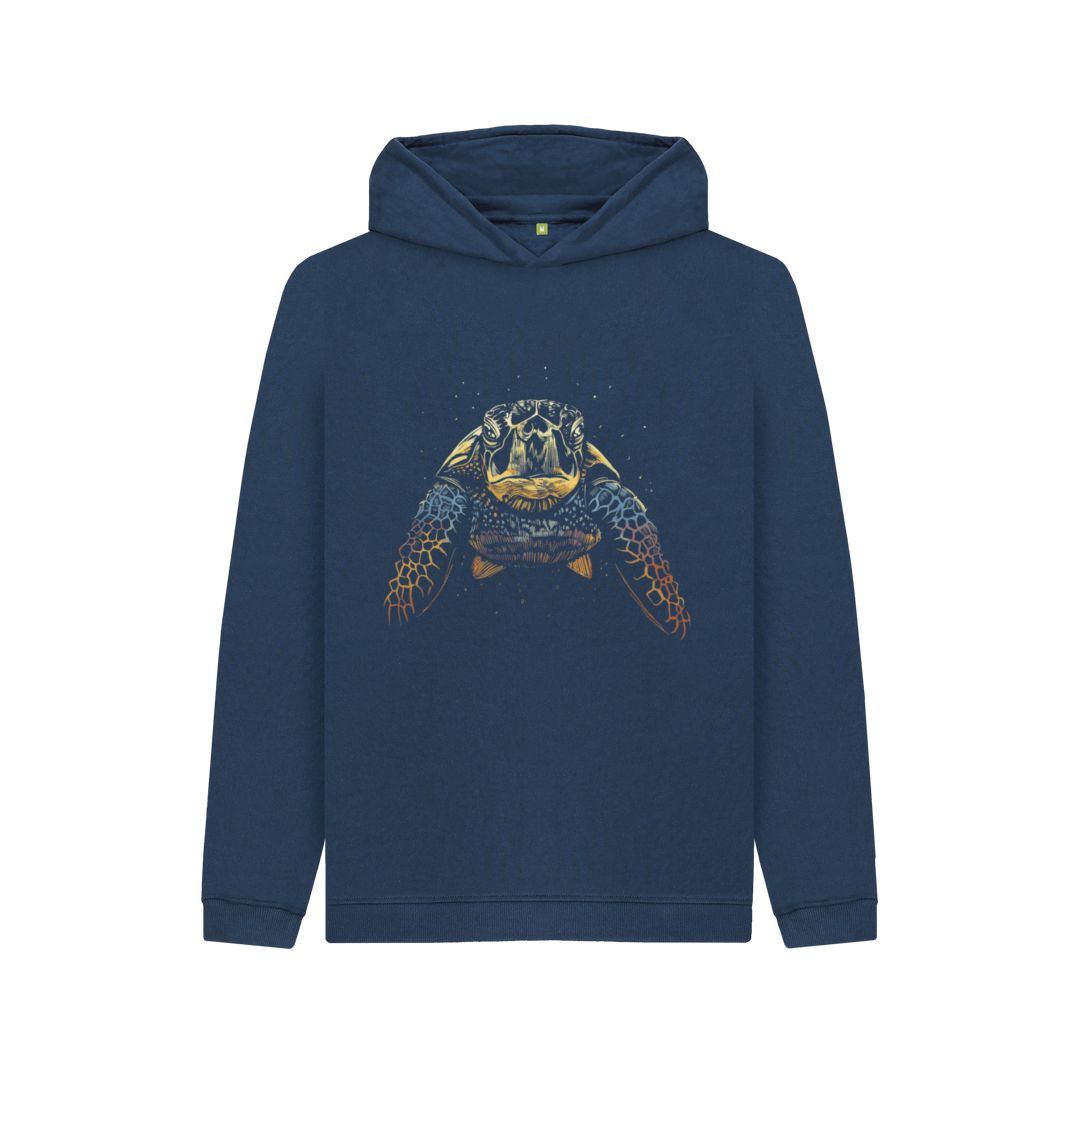 Navy Blue The Colour Turtle Kids Pullover Hoodie